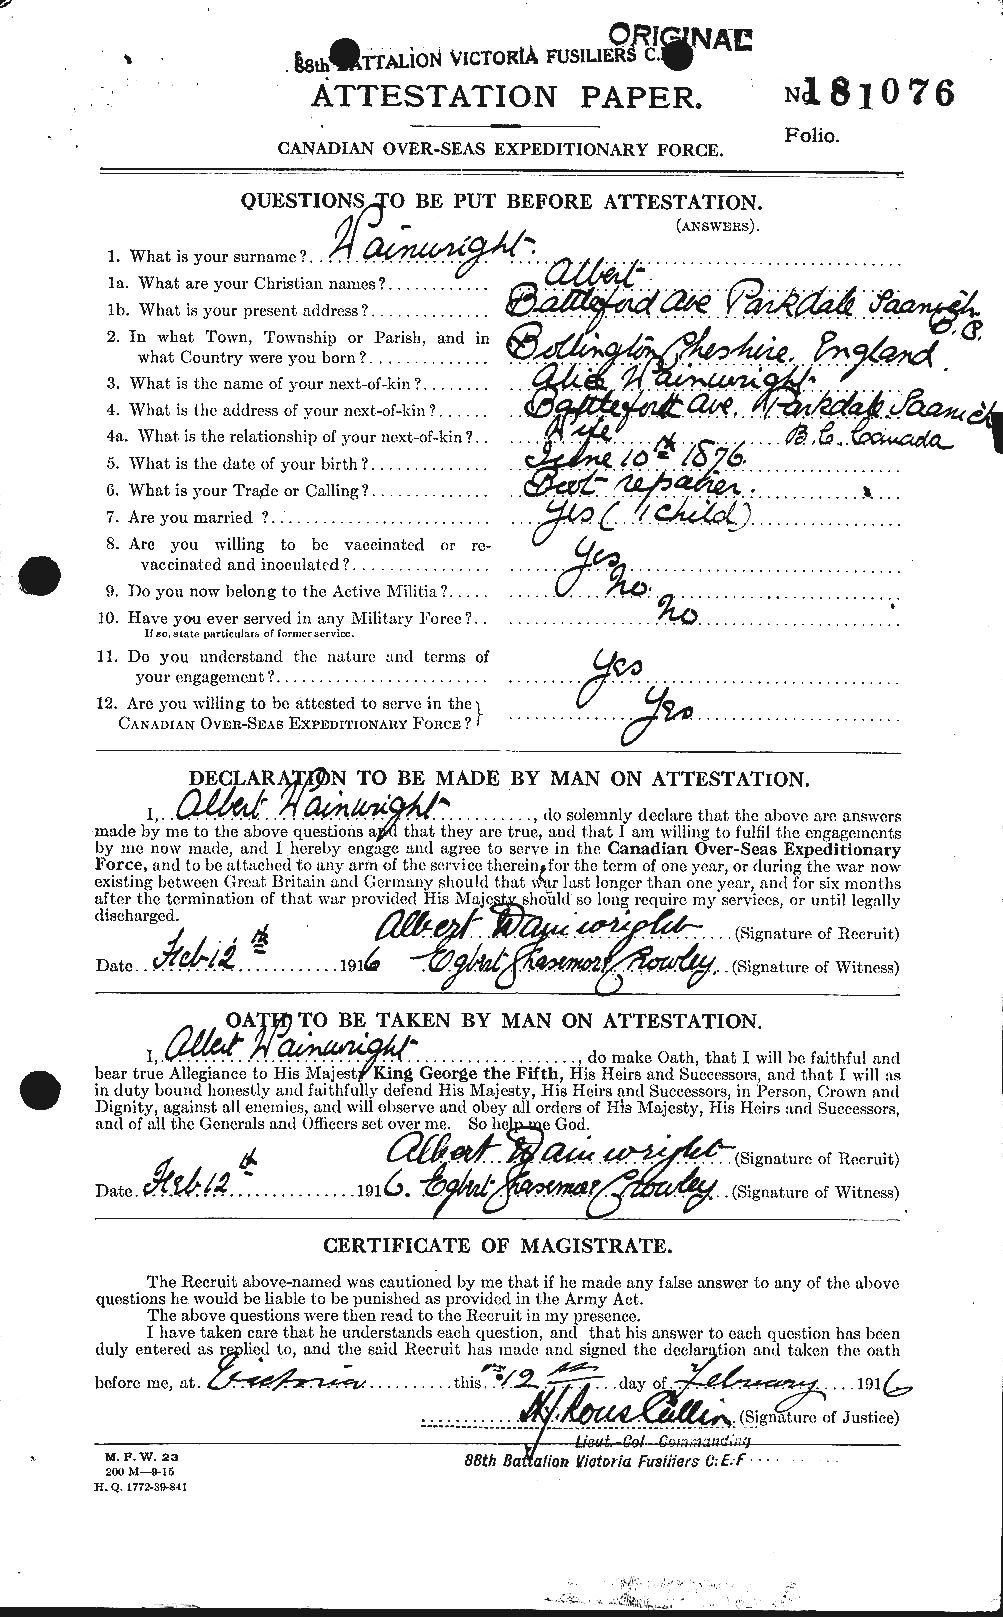 Personnel Records of the First World War - CEF 654166a